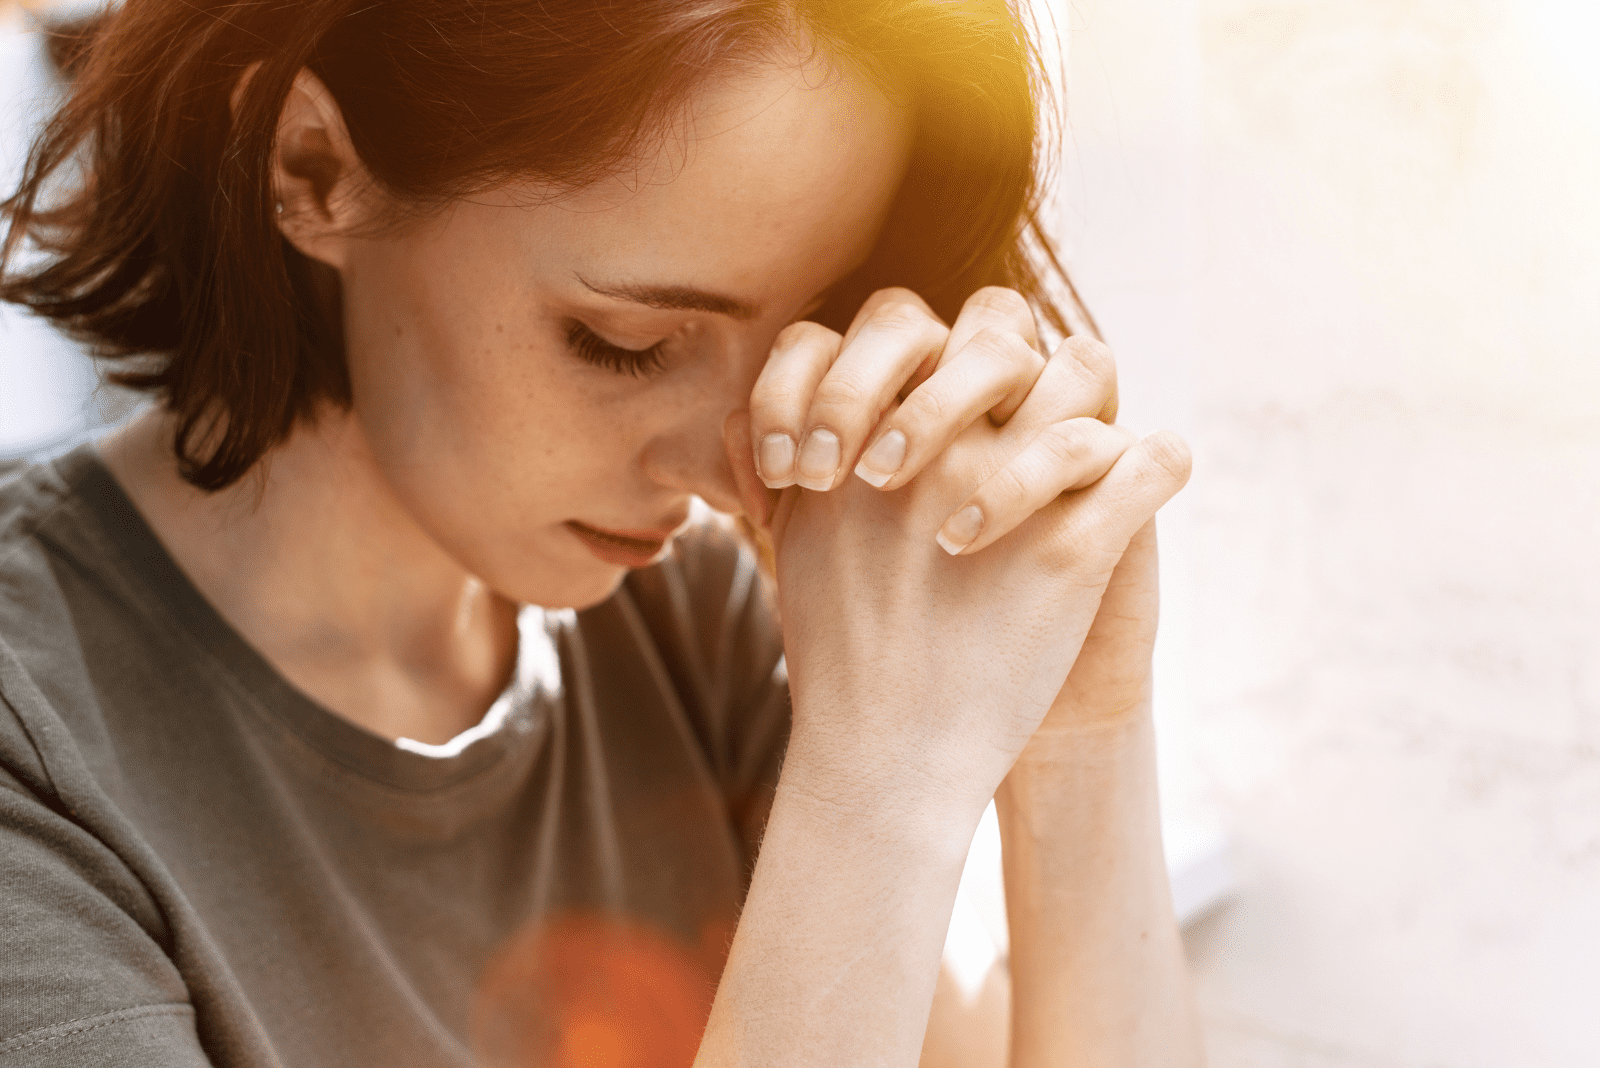 a woman with short hair is praying